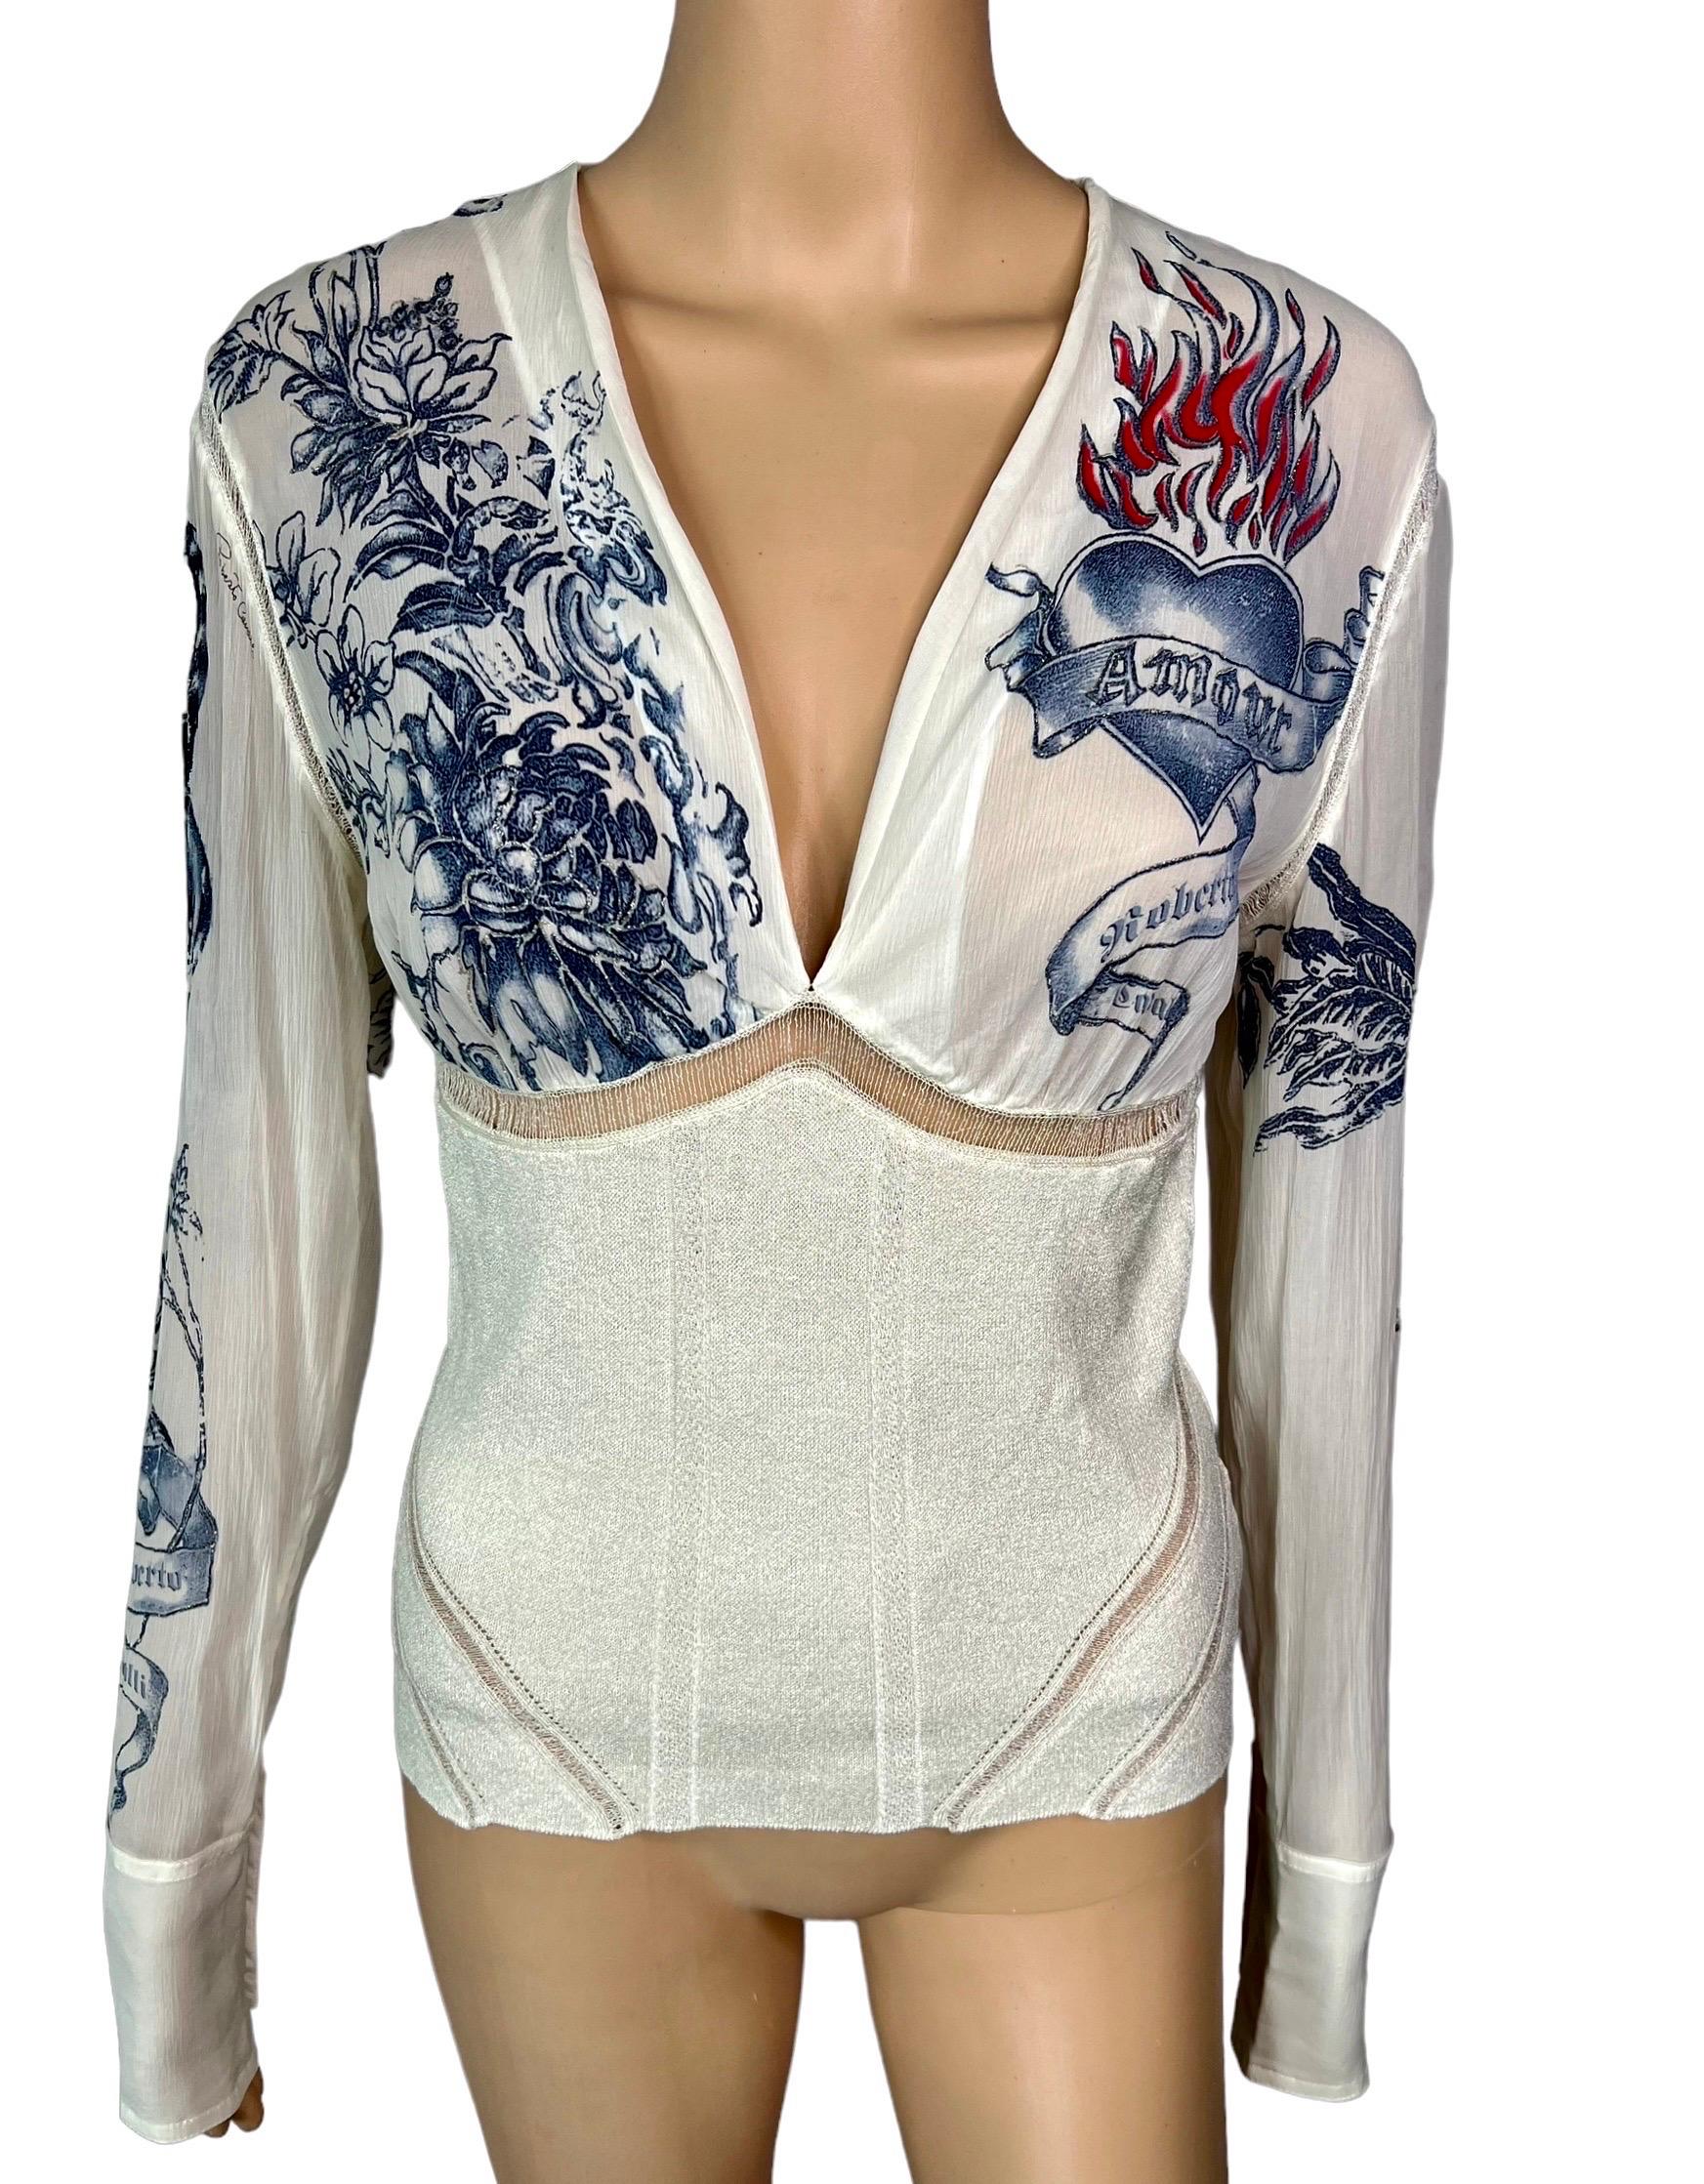 Gray Roberto Cavalli S/S 2003 Tattoo Print Plunging Silk Knit Sheer Panels Blouse Top For Sale